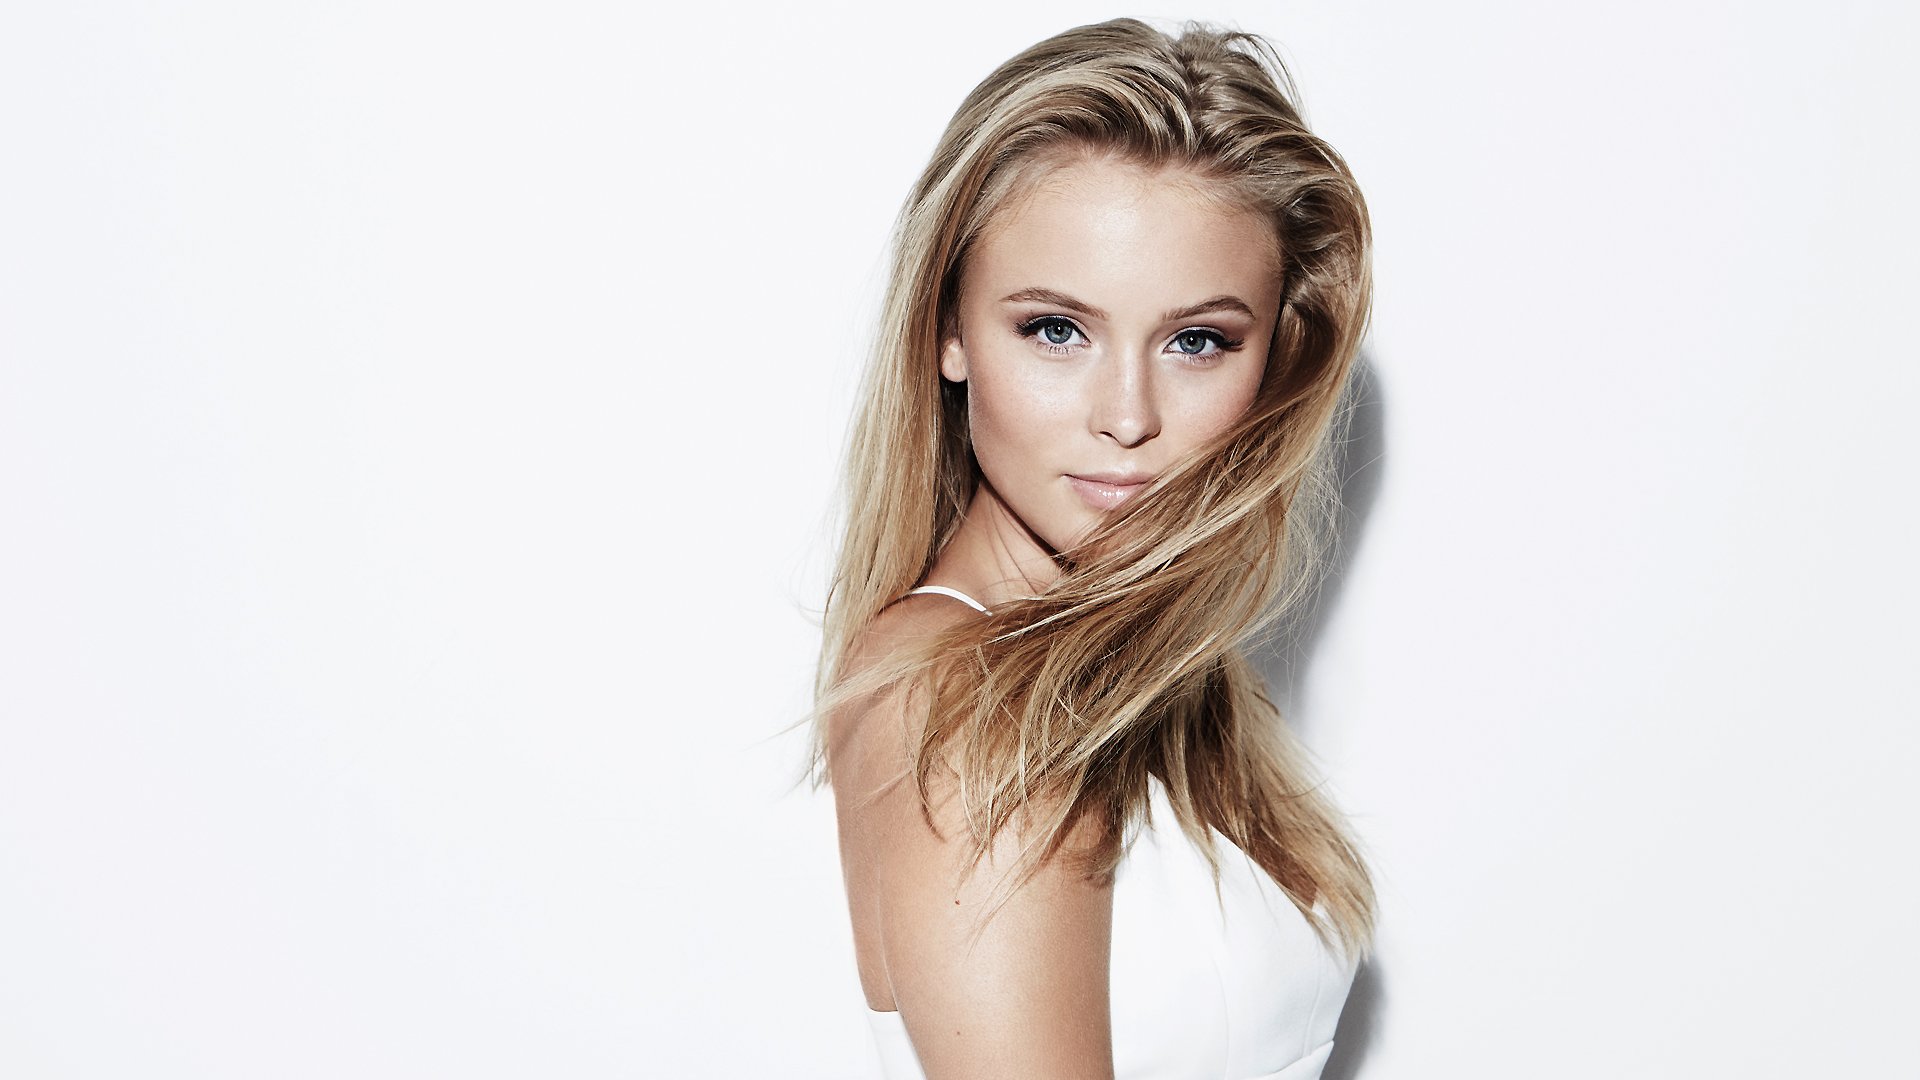 Zara Larsson Hd Wallpaper - Zara Larsson , HD Wallpaper & Backgrounds